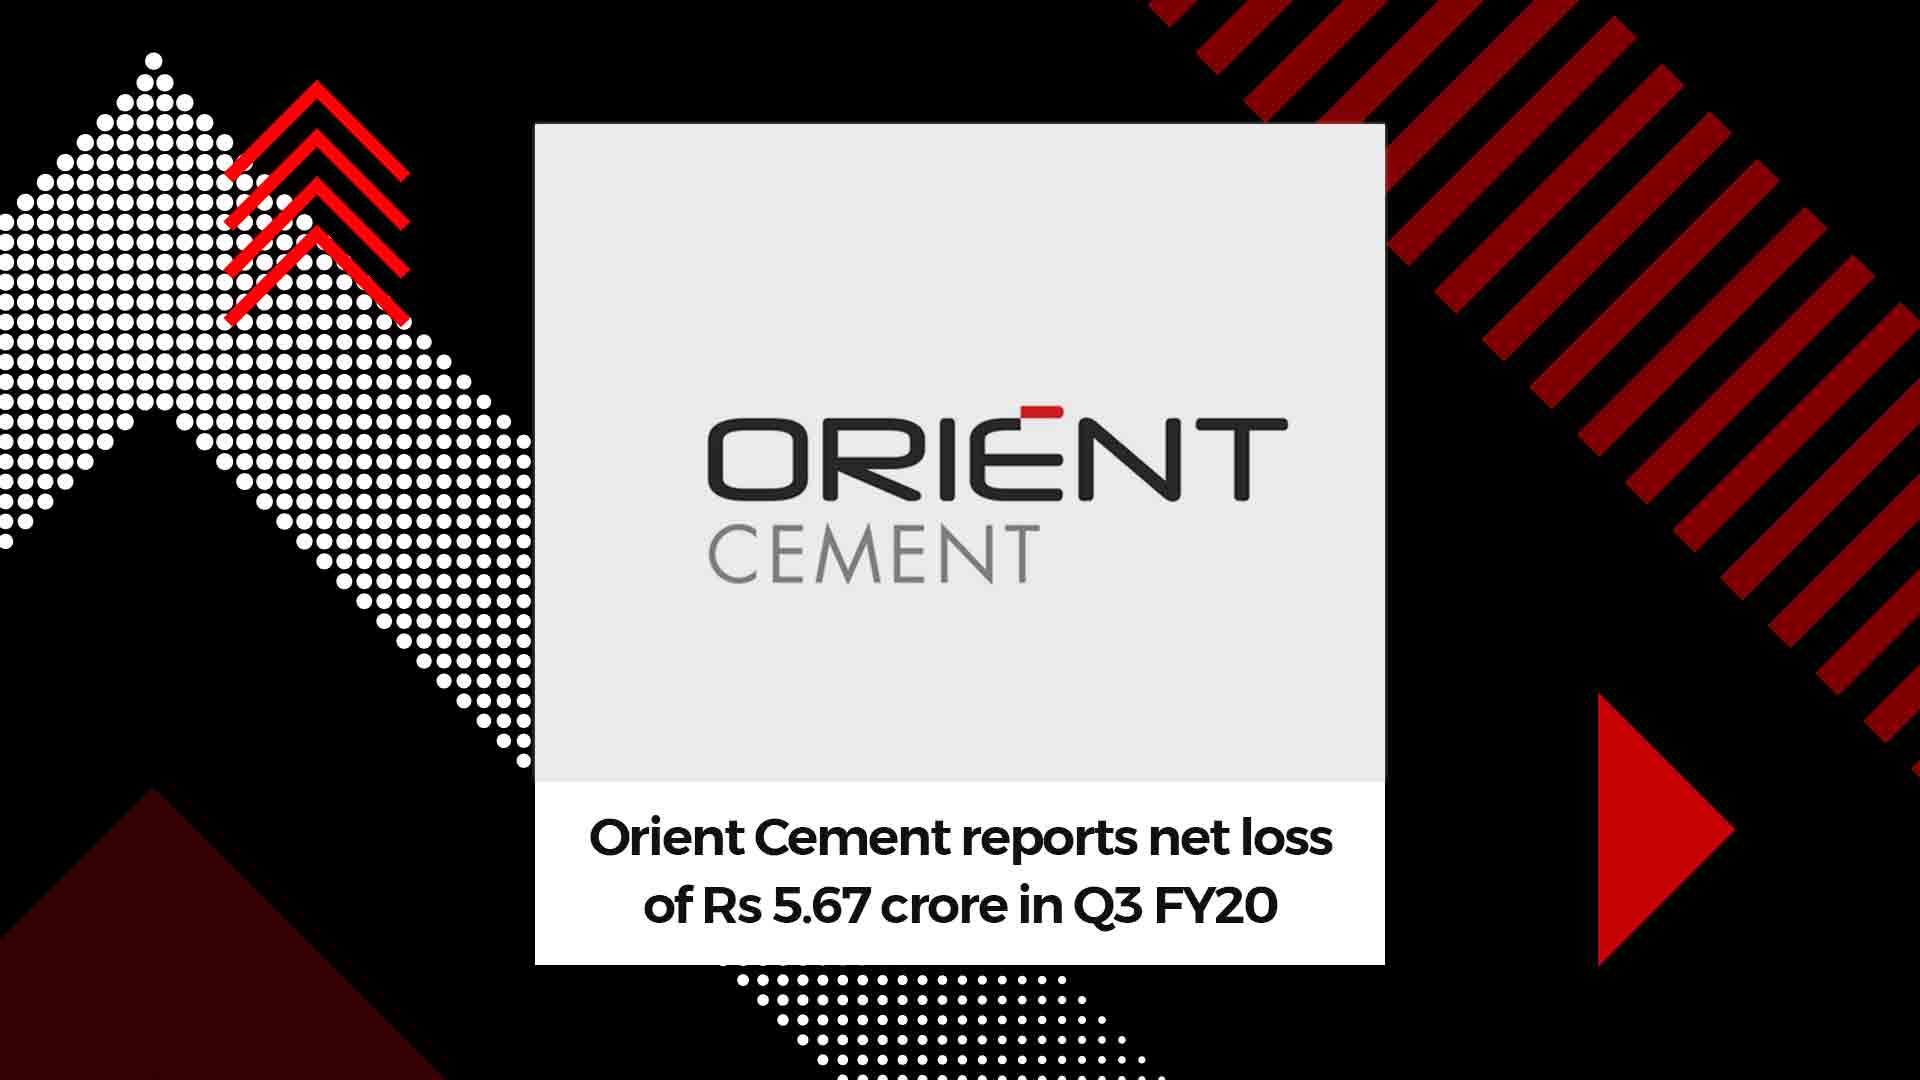 Orient Cement Ltd reported narrowing of its net loss to Rs 5.67 crore